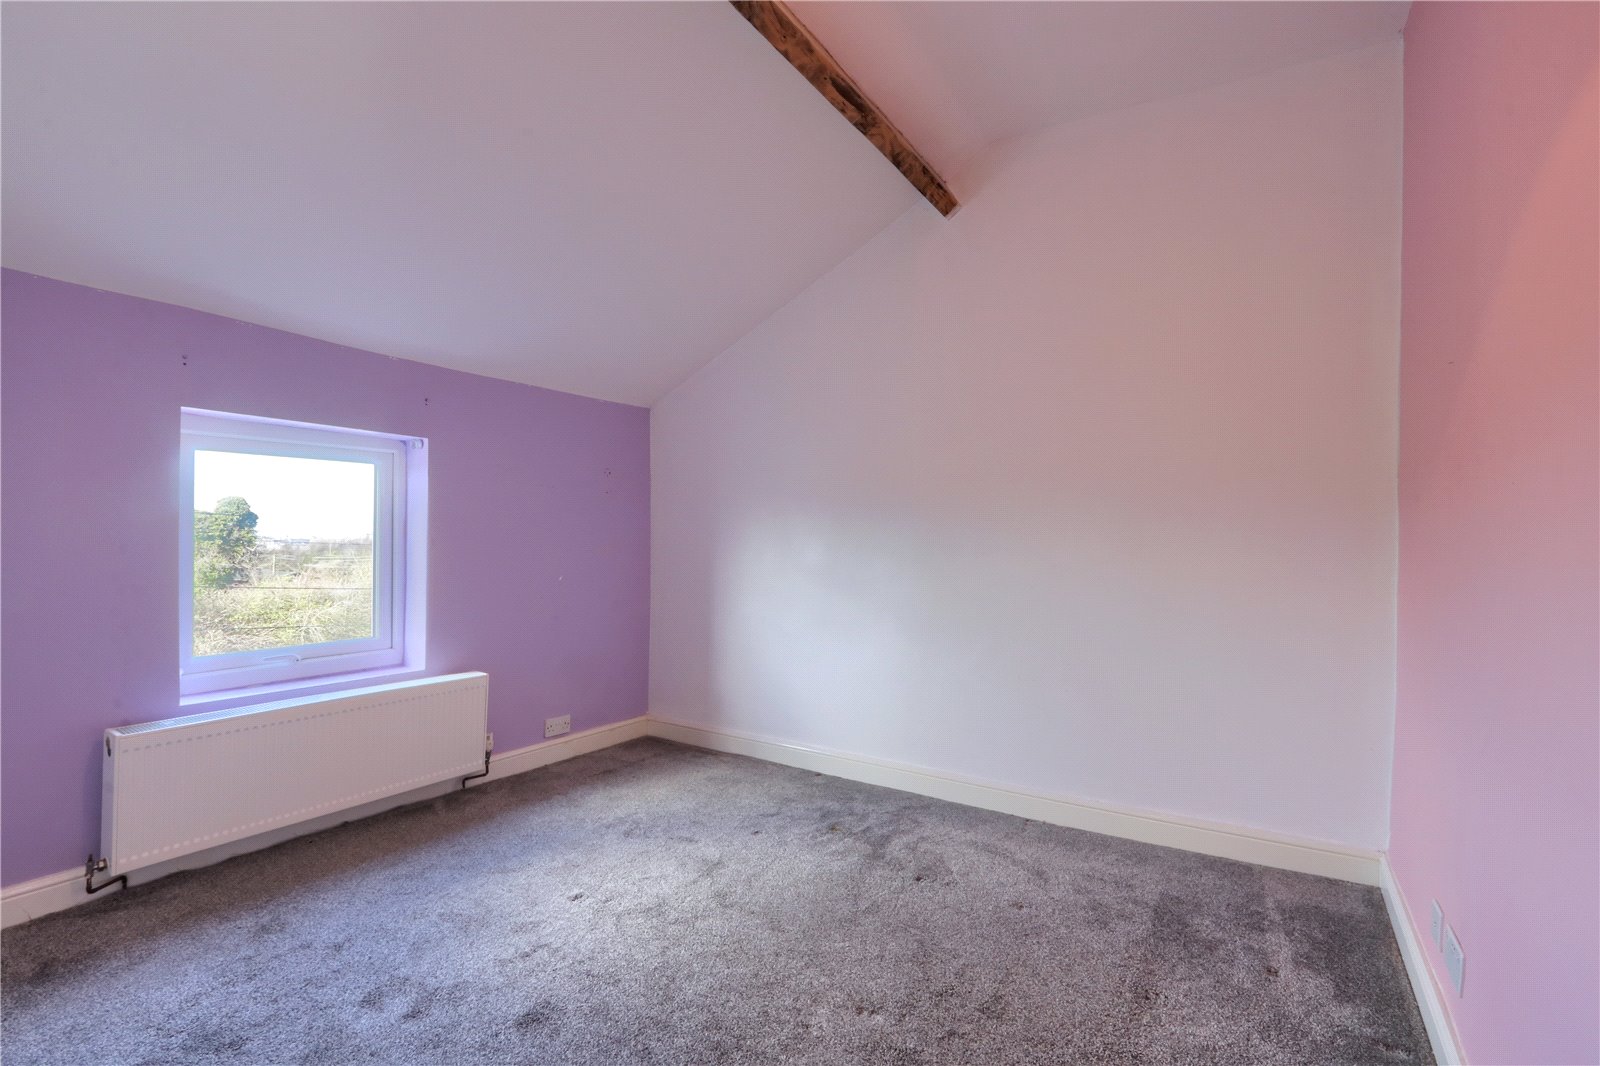 2 bed house for sale in South Lackenby, Middlesbrough  - Property Image 11